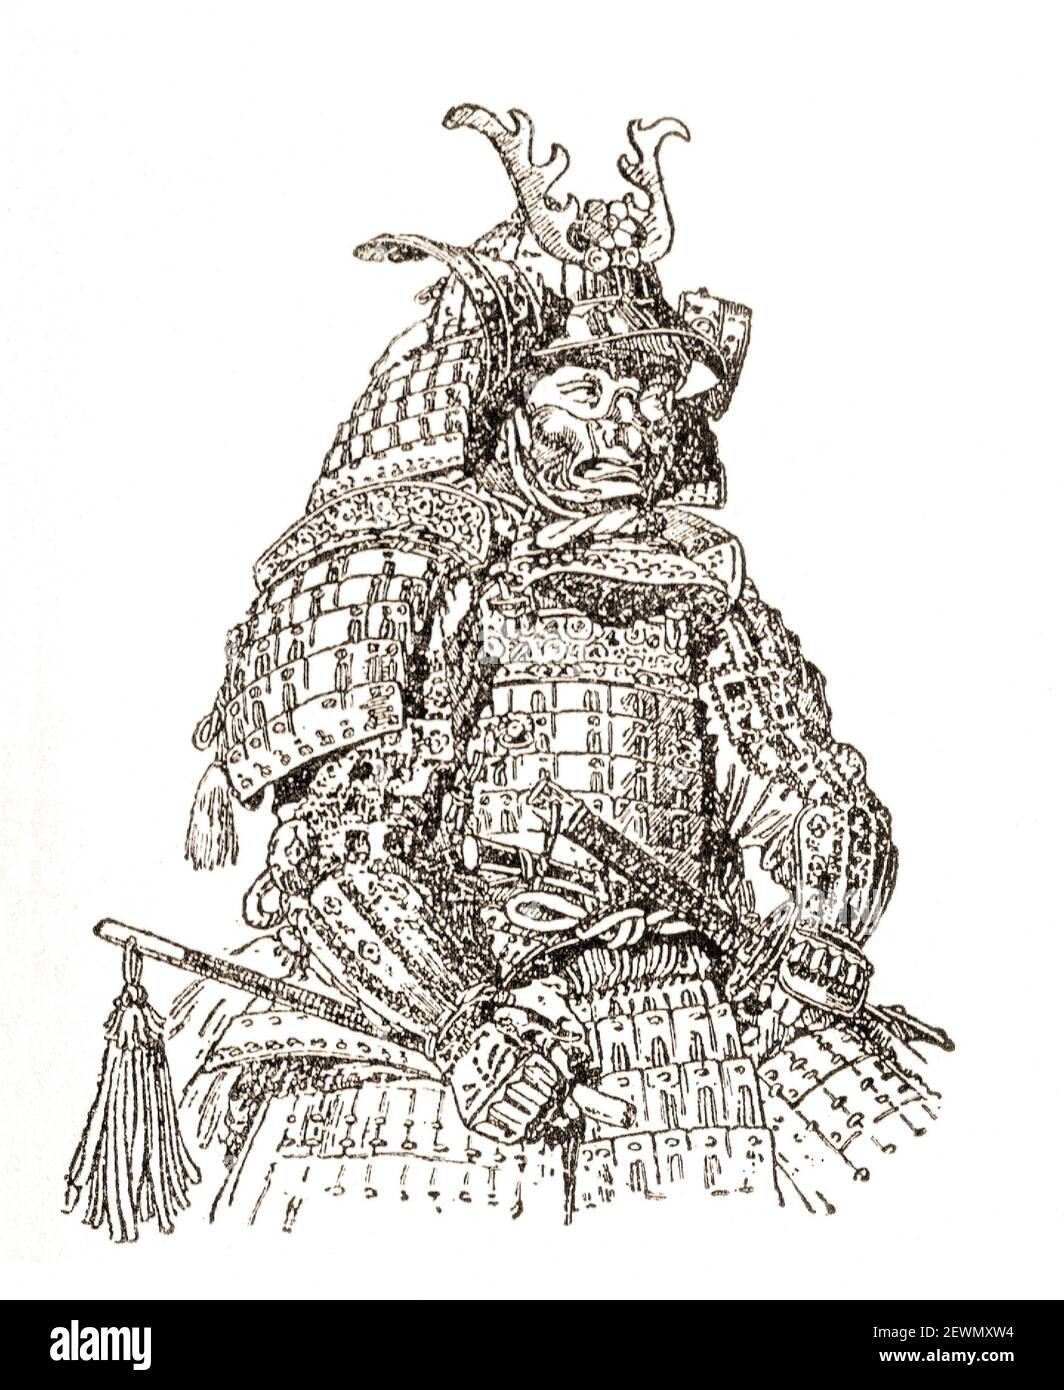 Japanese armor of the 17-18 centuries. Medieval engraving. Stock Photo